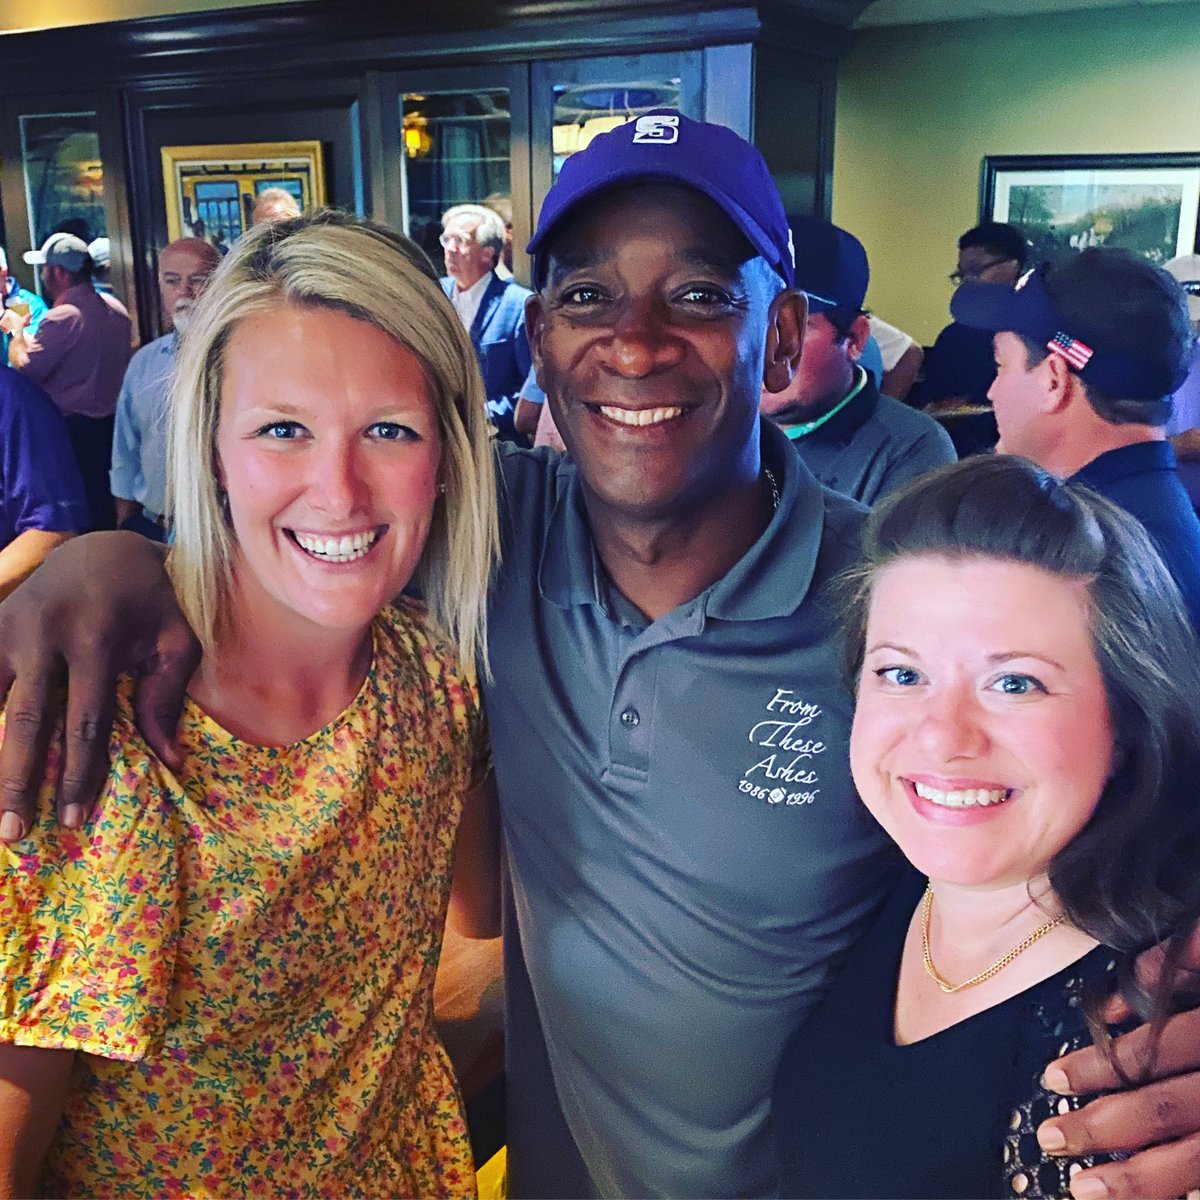 Just hanging with Tony Rice and softball alumni Angela Marx. Tony did say he would be our assistant coach next year. I am so thankful for the amazing alumni support at Scranton. #greatdaytobearoyal #scrantonsoftball